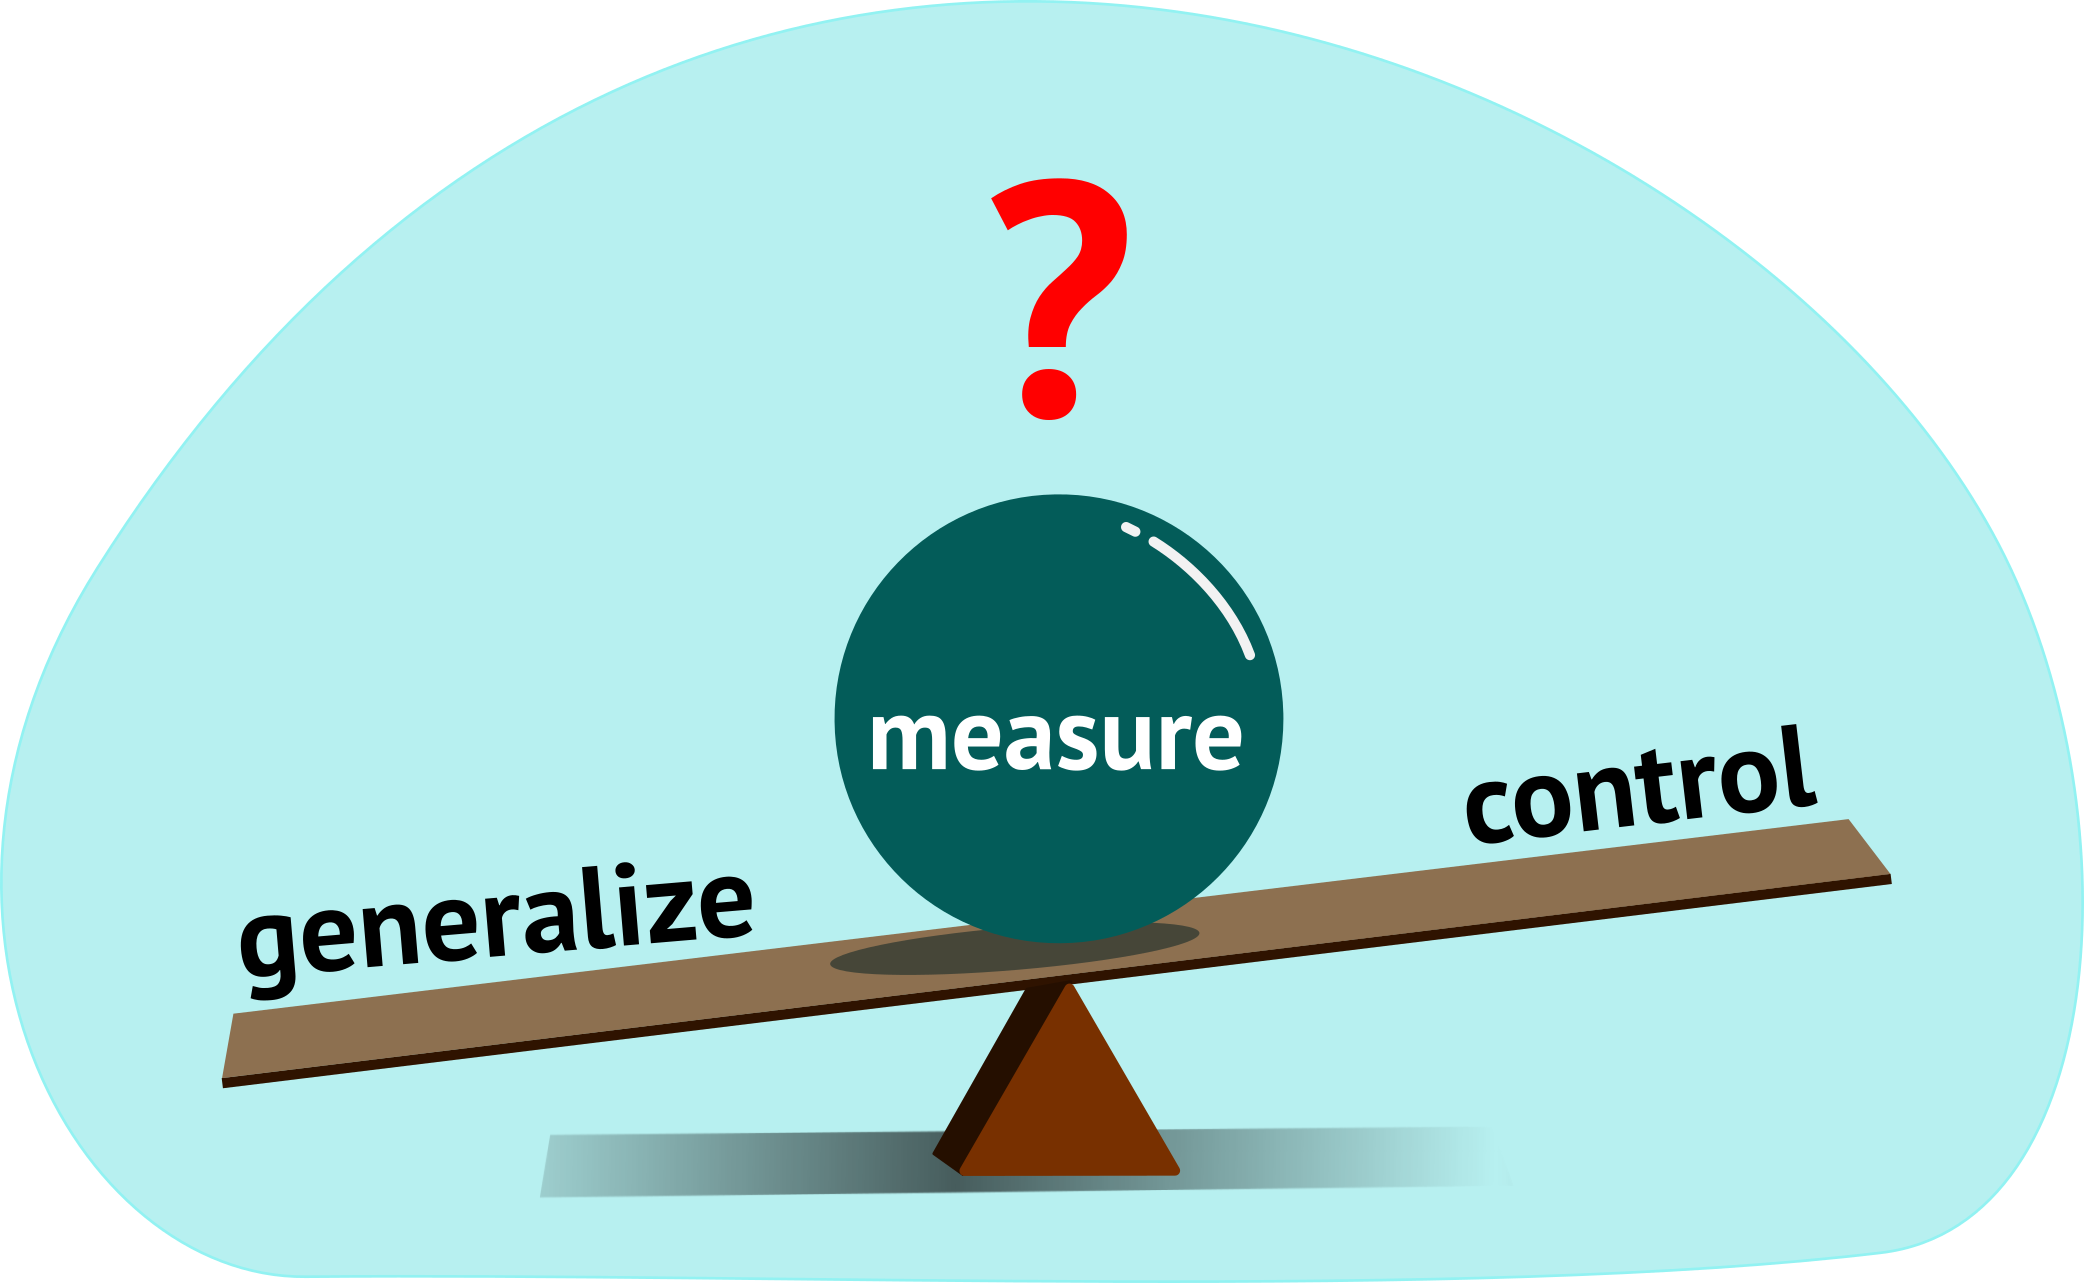 A digital illustration of a seesaw with the word “generalize” on the left side and the word “control” on the right side of the seesaw. In the center is a turquoise ball with the word “measure” written on it. The background is a pleasant light blue.